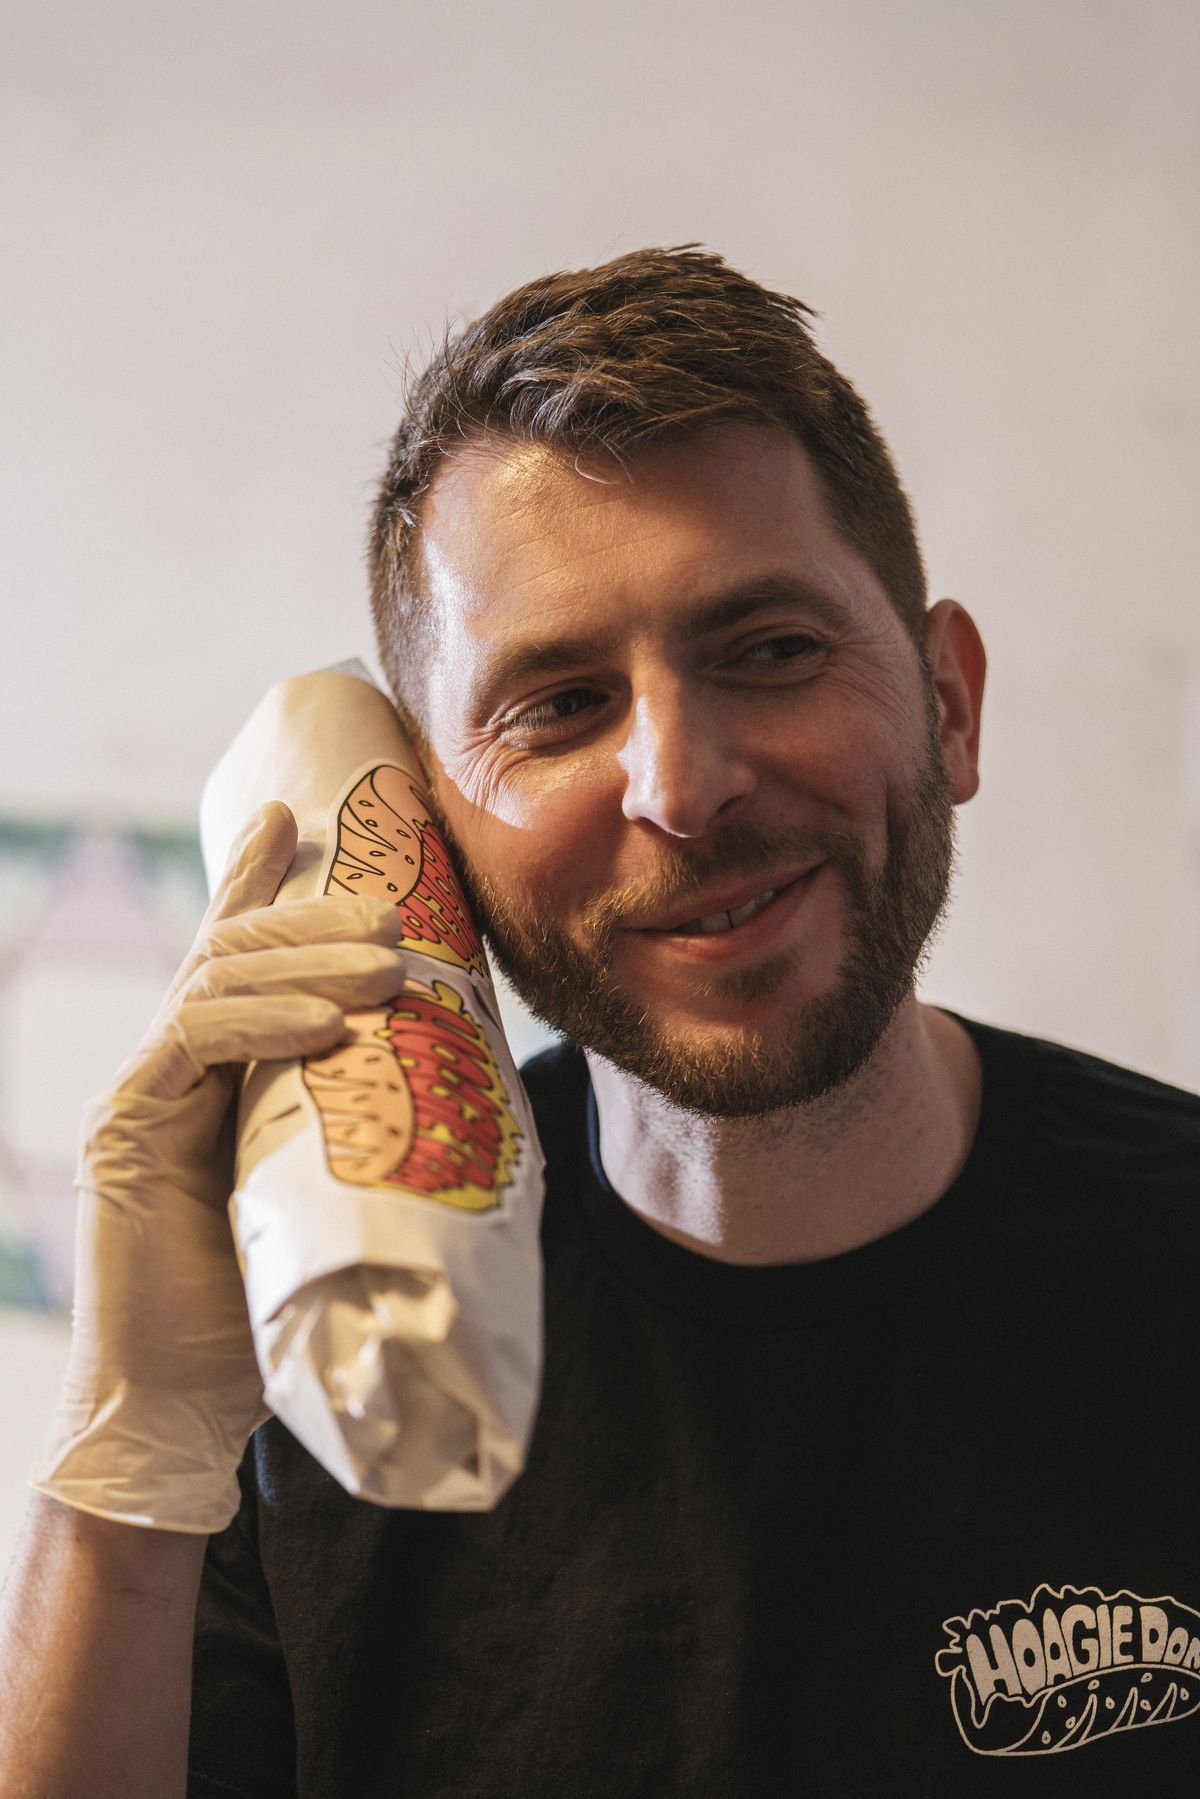 A man with a beard and wearing a food safety glove holds a hoagie wrapped in paper up to his ear like it’s a telephone.